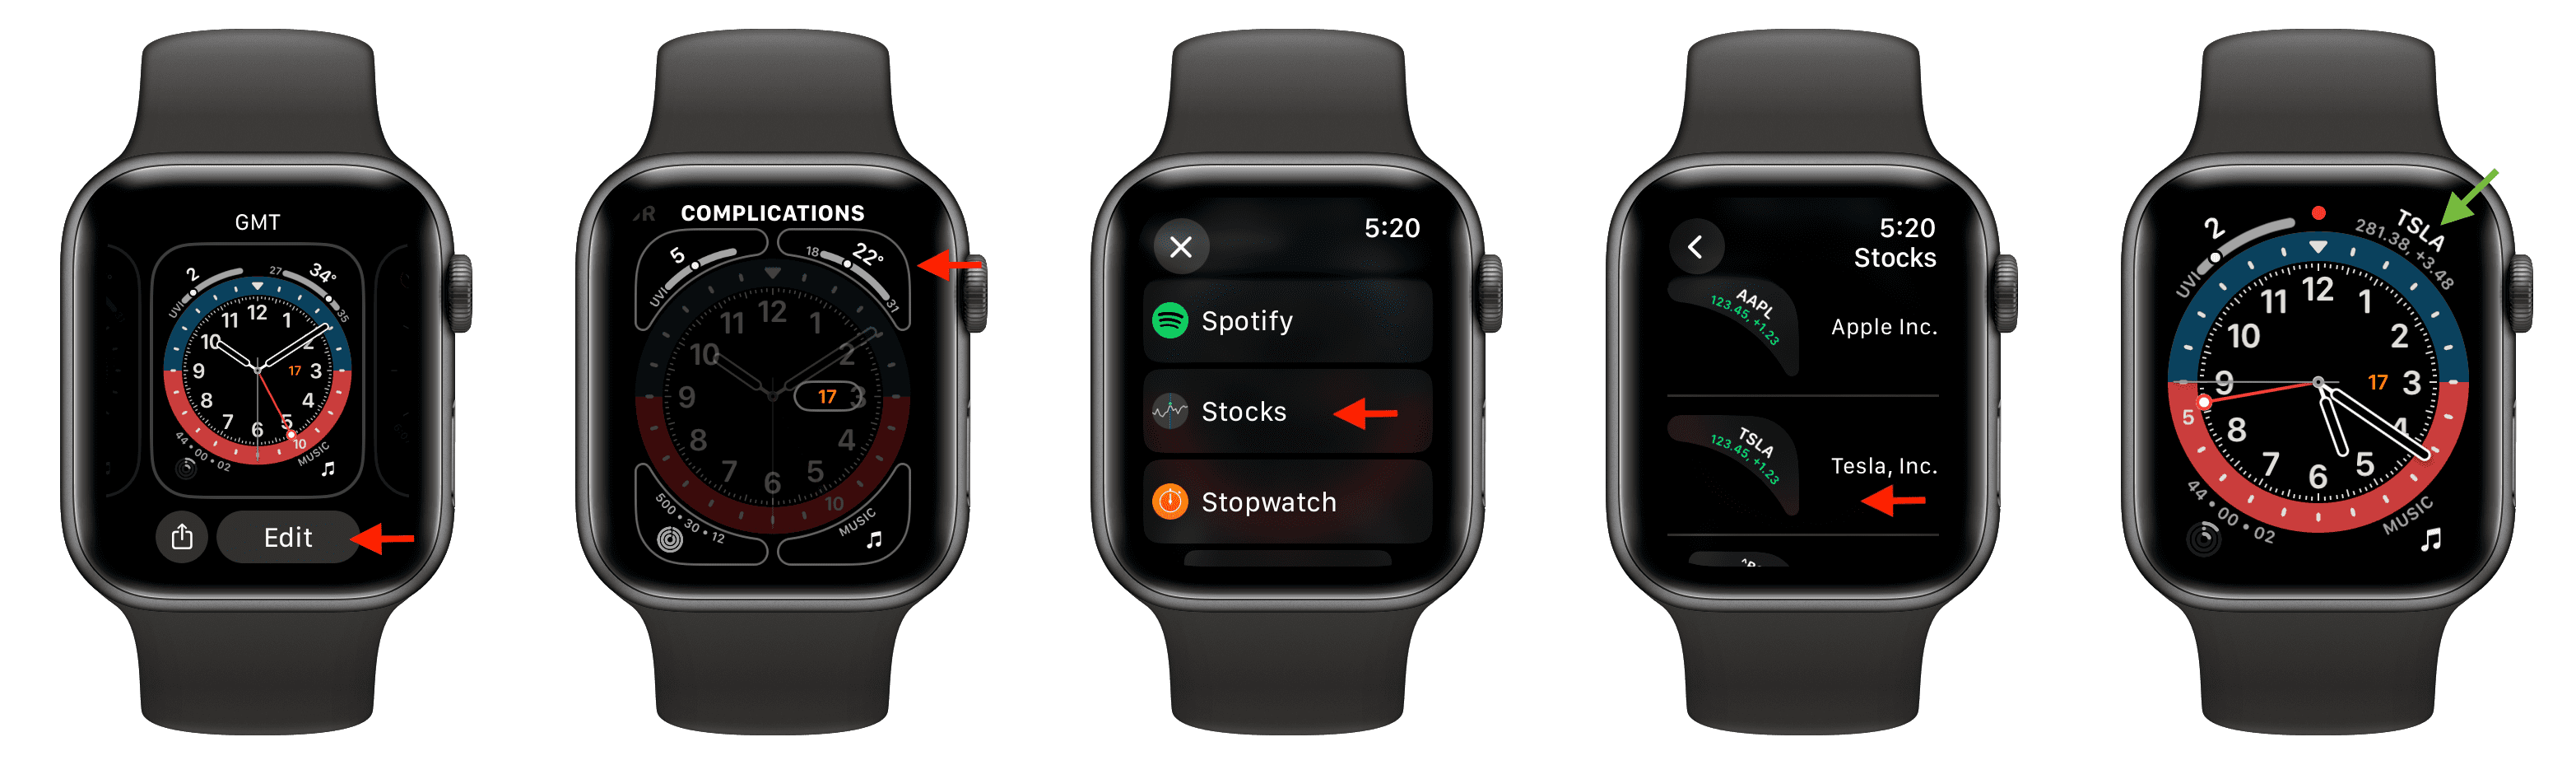 Add Stocks complication to Apple Watch face